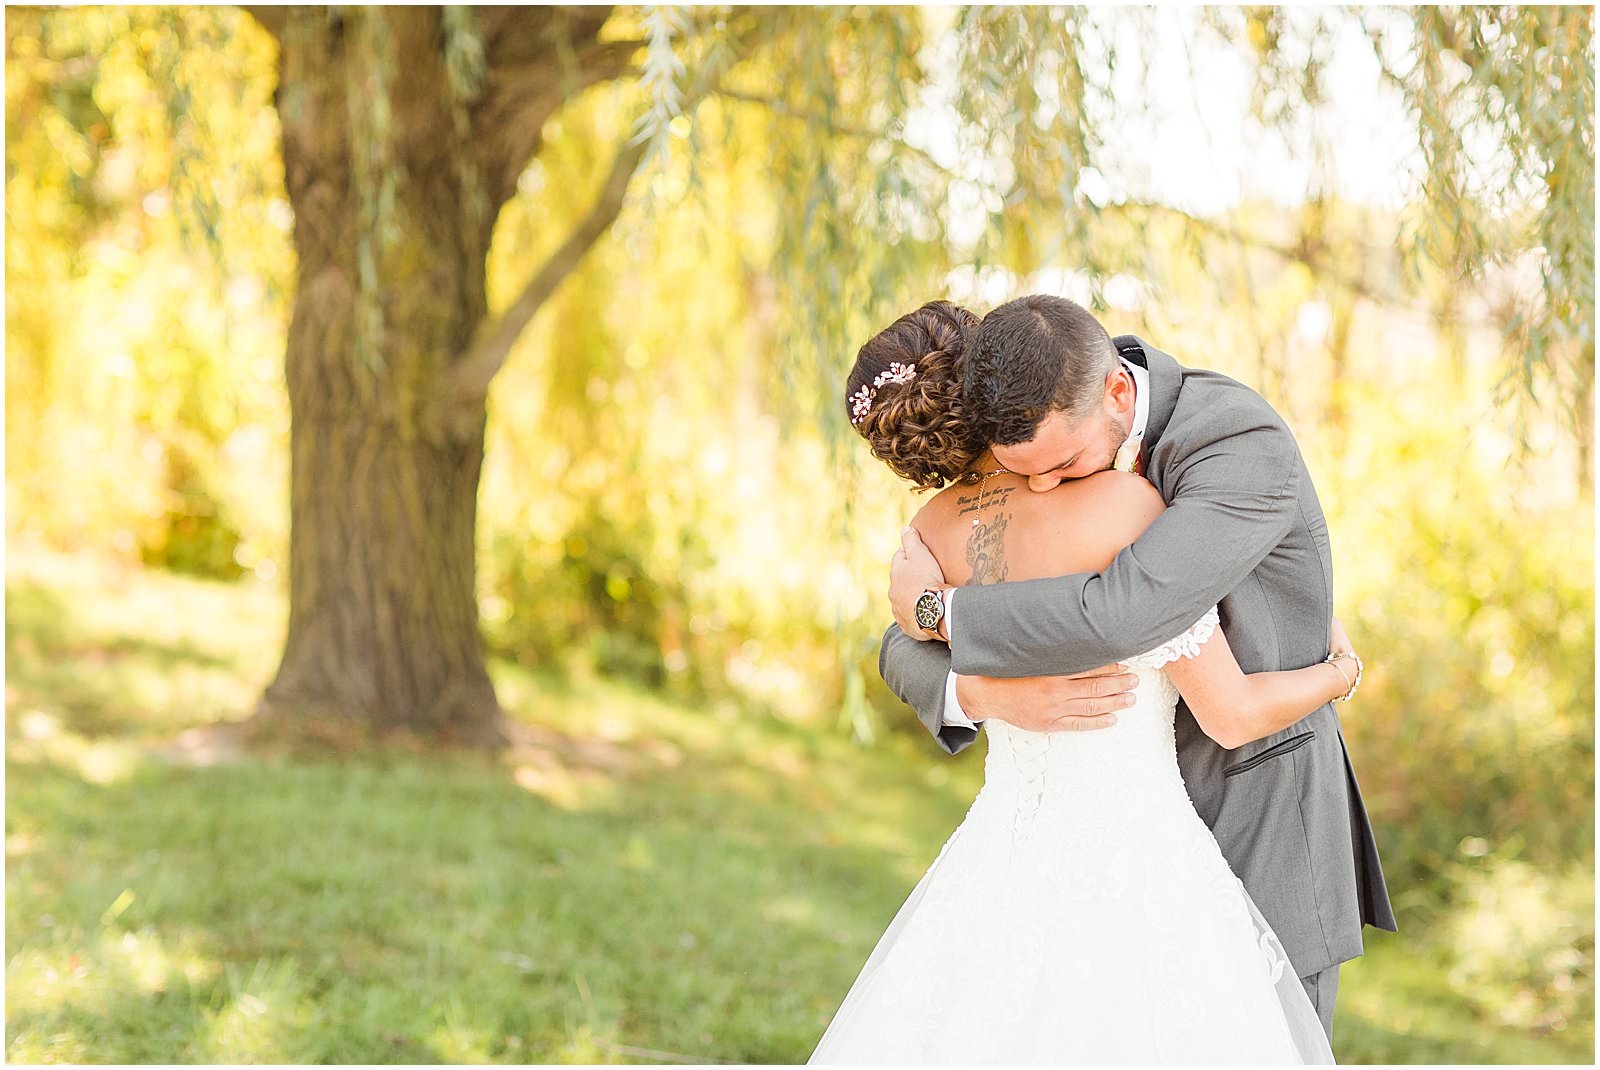 A Stunning Fall Wedding in Indianapolis, IN |. Sally and Andrew | Bret and Brandie Photography 0049.jpg